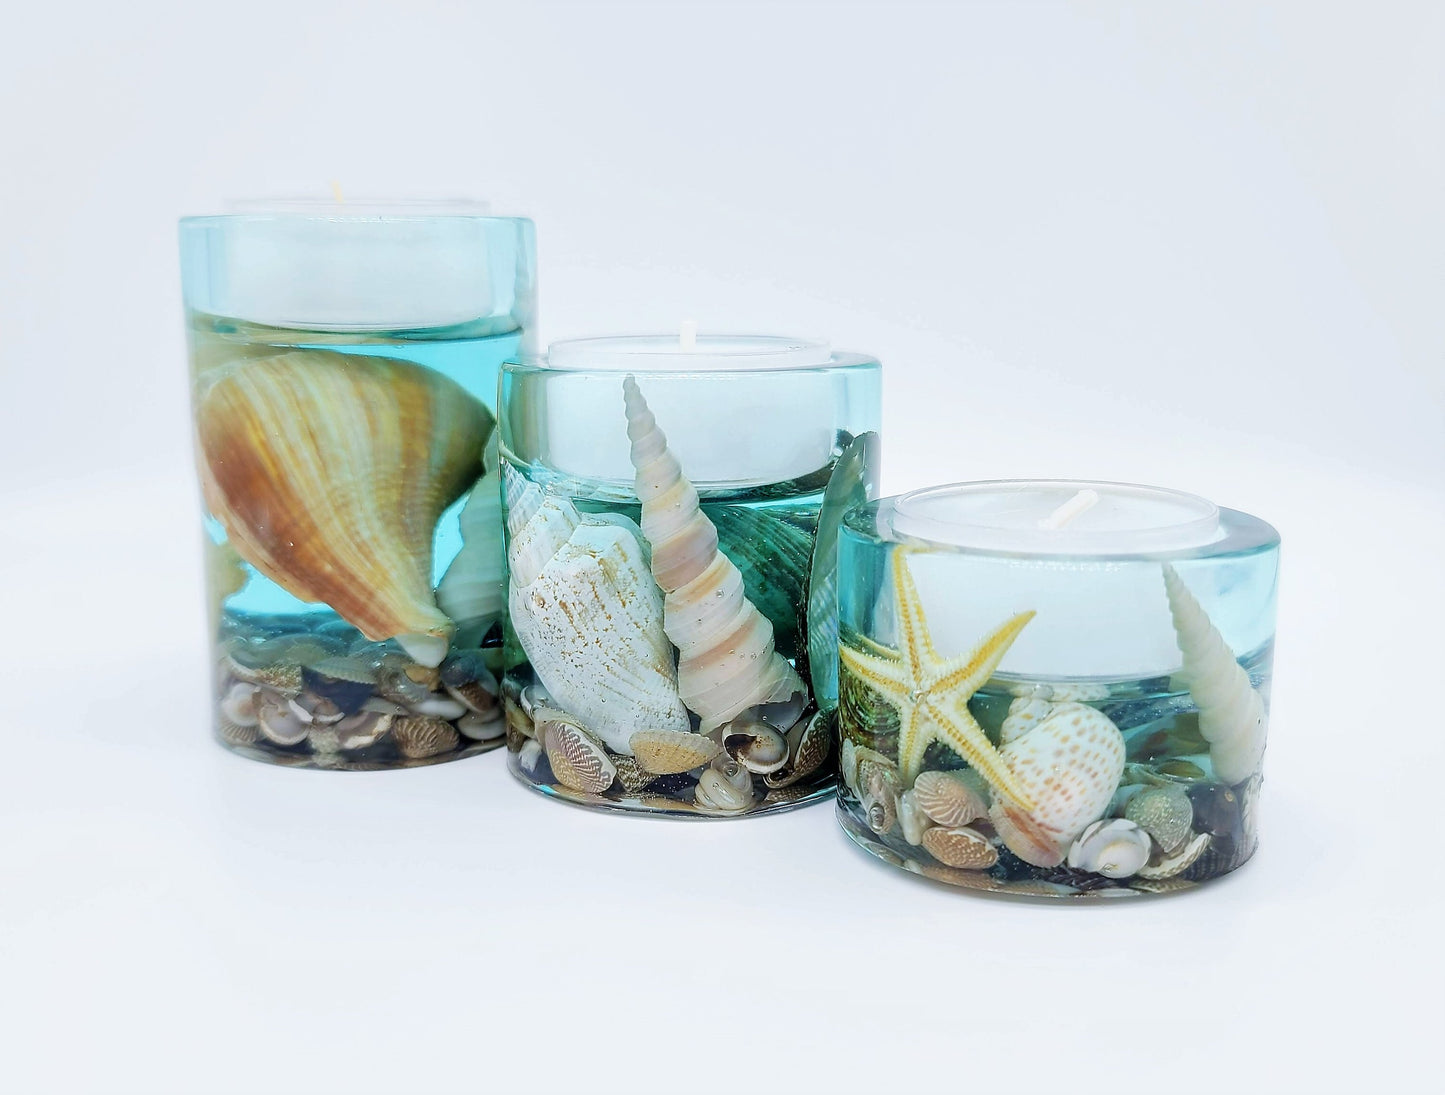 Beach Themed Round Candle Holder Made with Eco-Friendly Epoxy Resin & Seashells - Includes Choice of Real UNSCENTED Tealight or LED Tealight